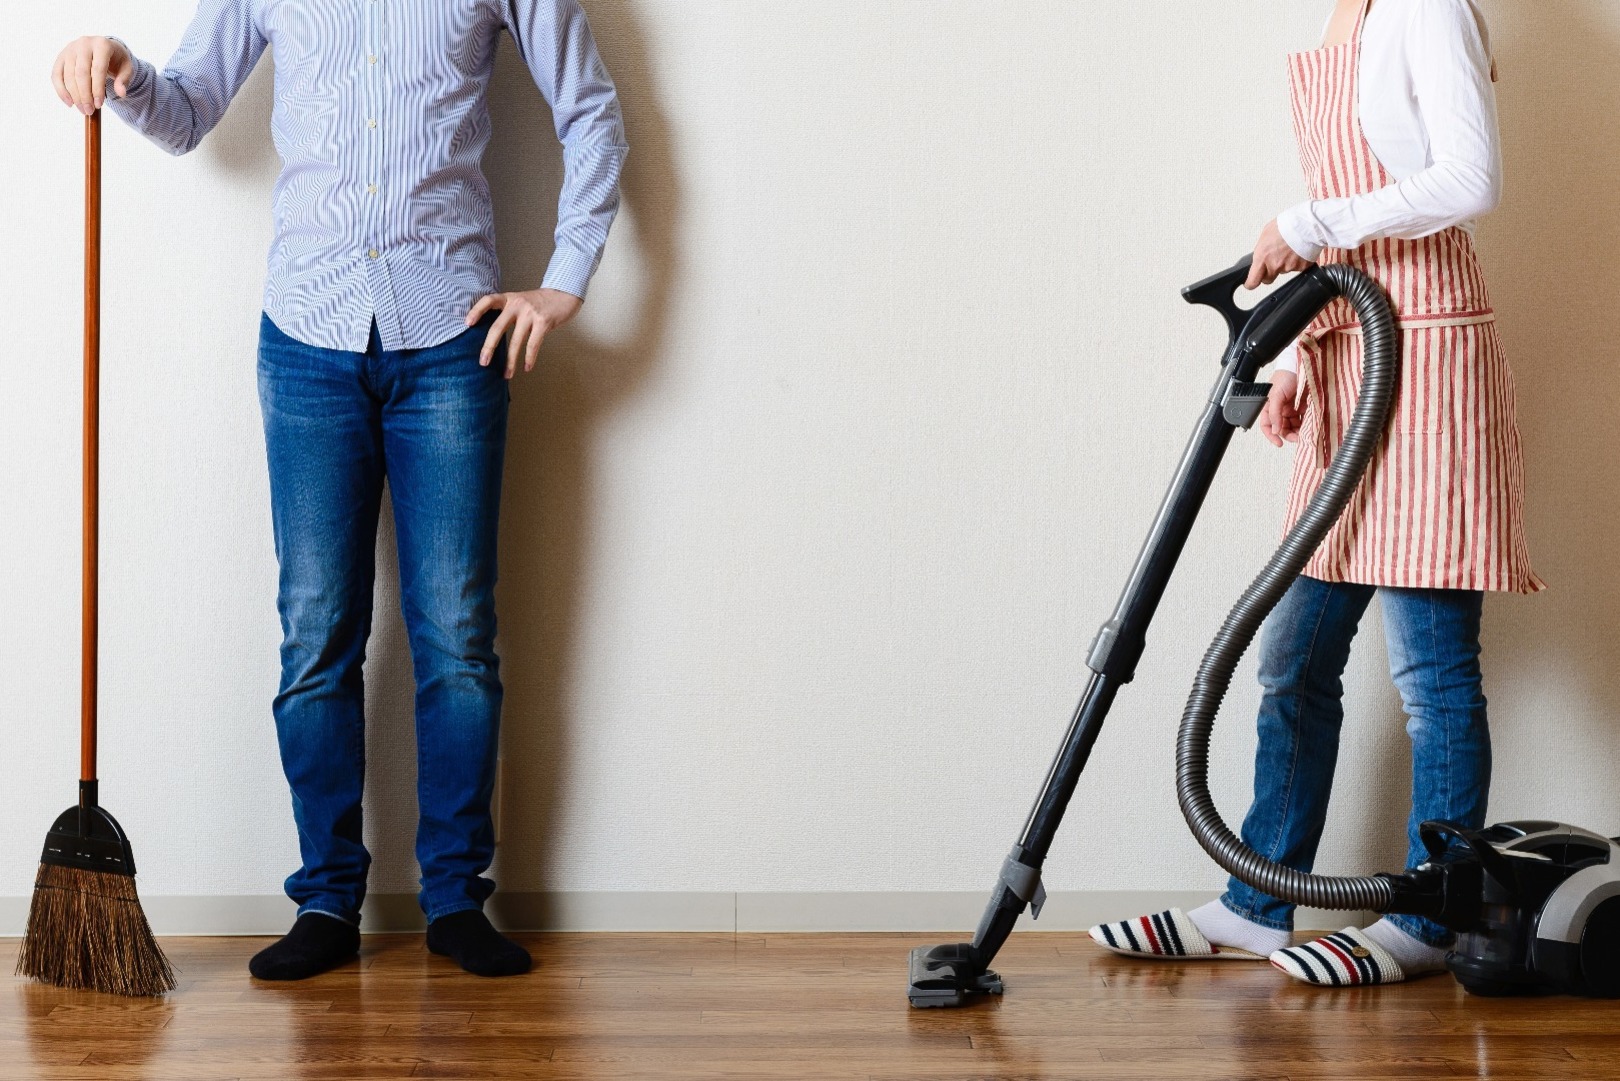 A couple with different household cleaning items, such as a broom and hoover.